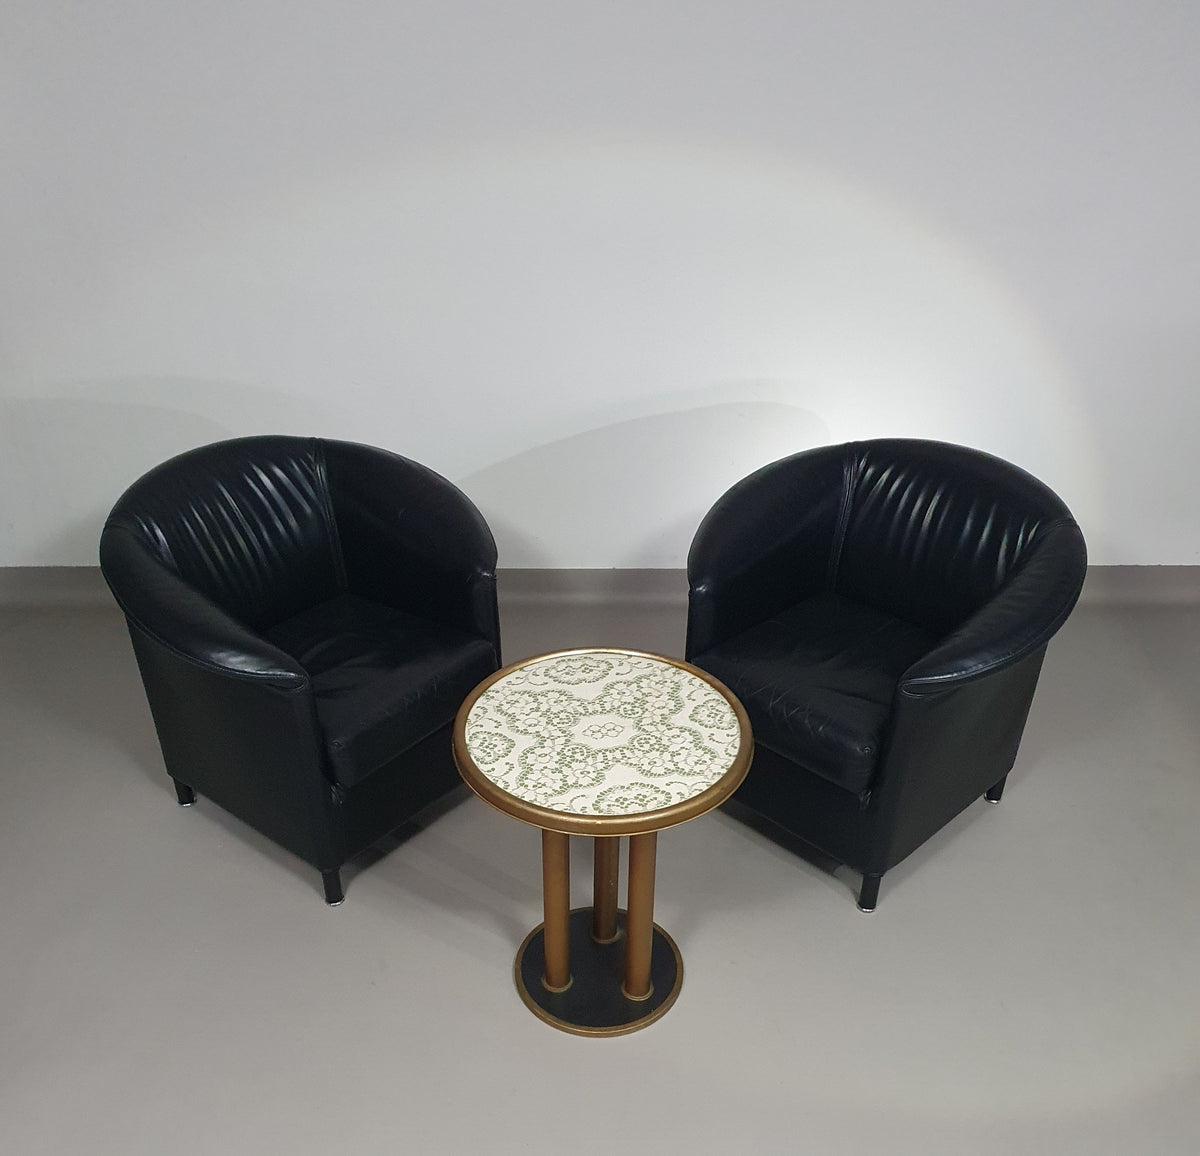 Aura chairs / black leather by Paolo Piva for Wittmann 1980